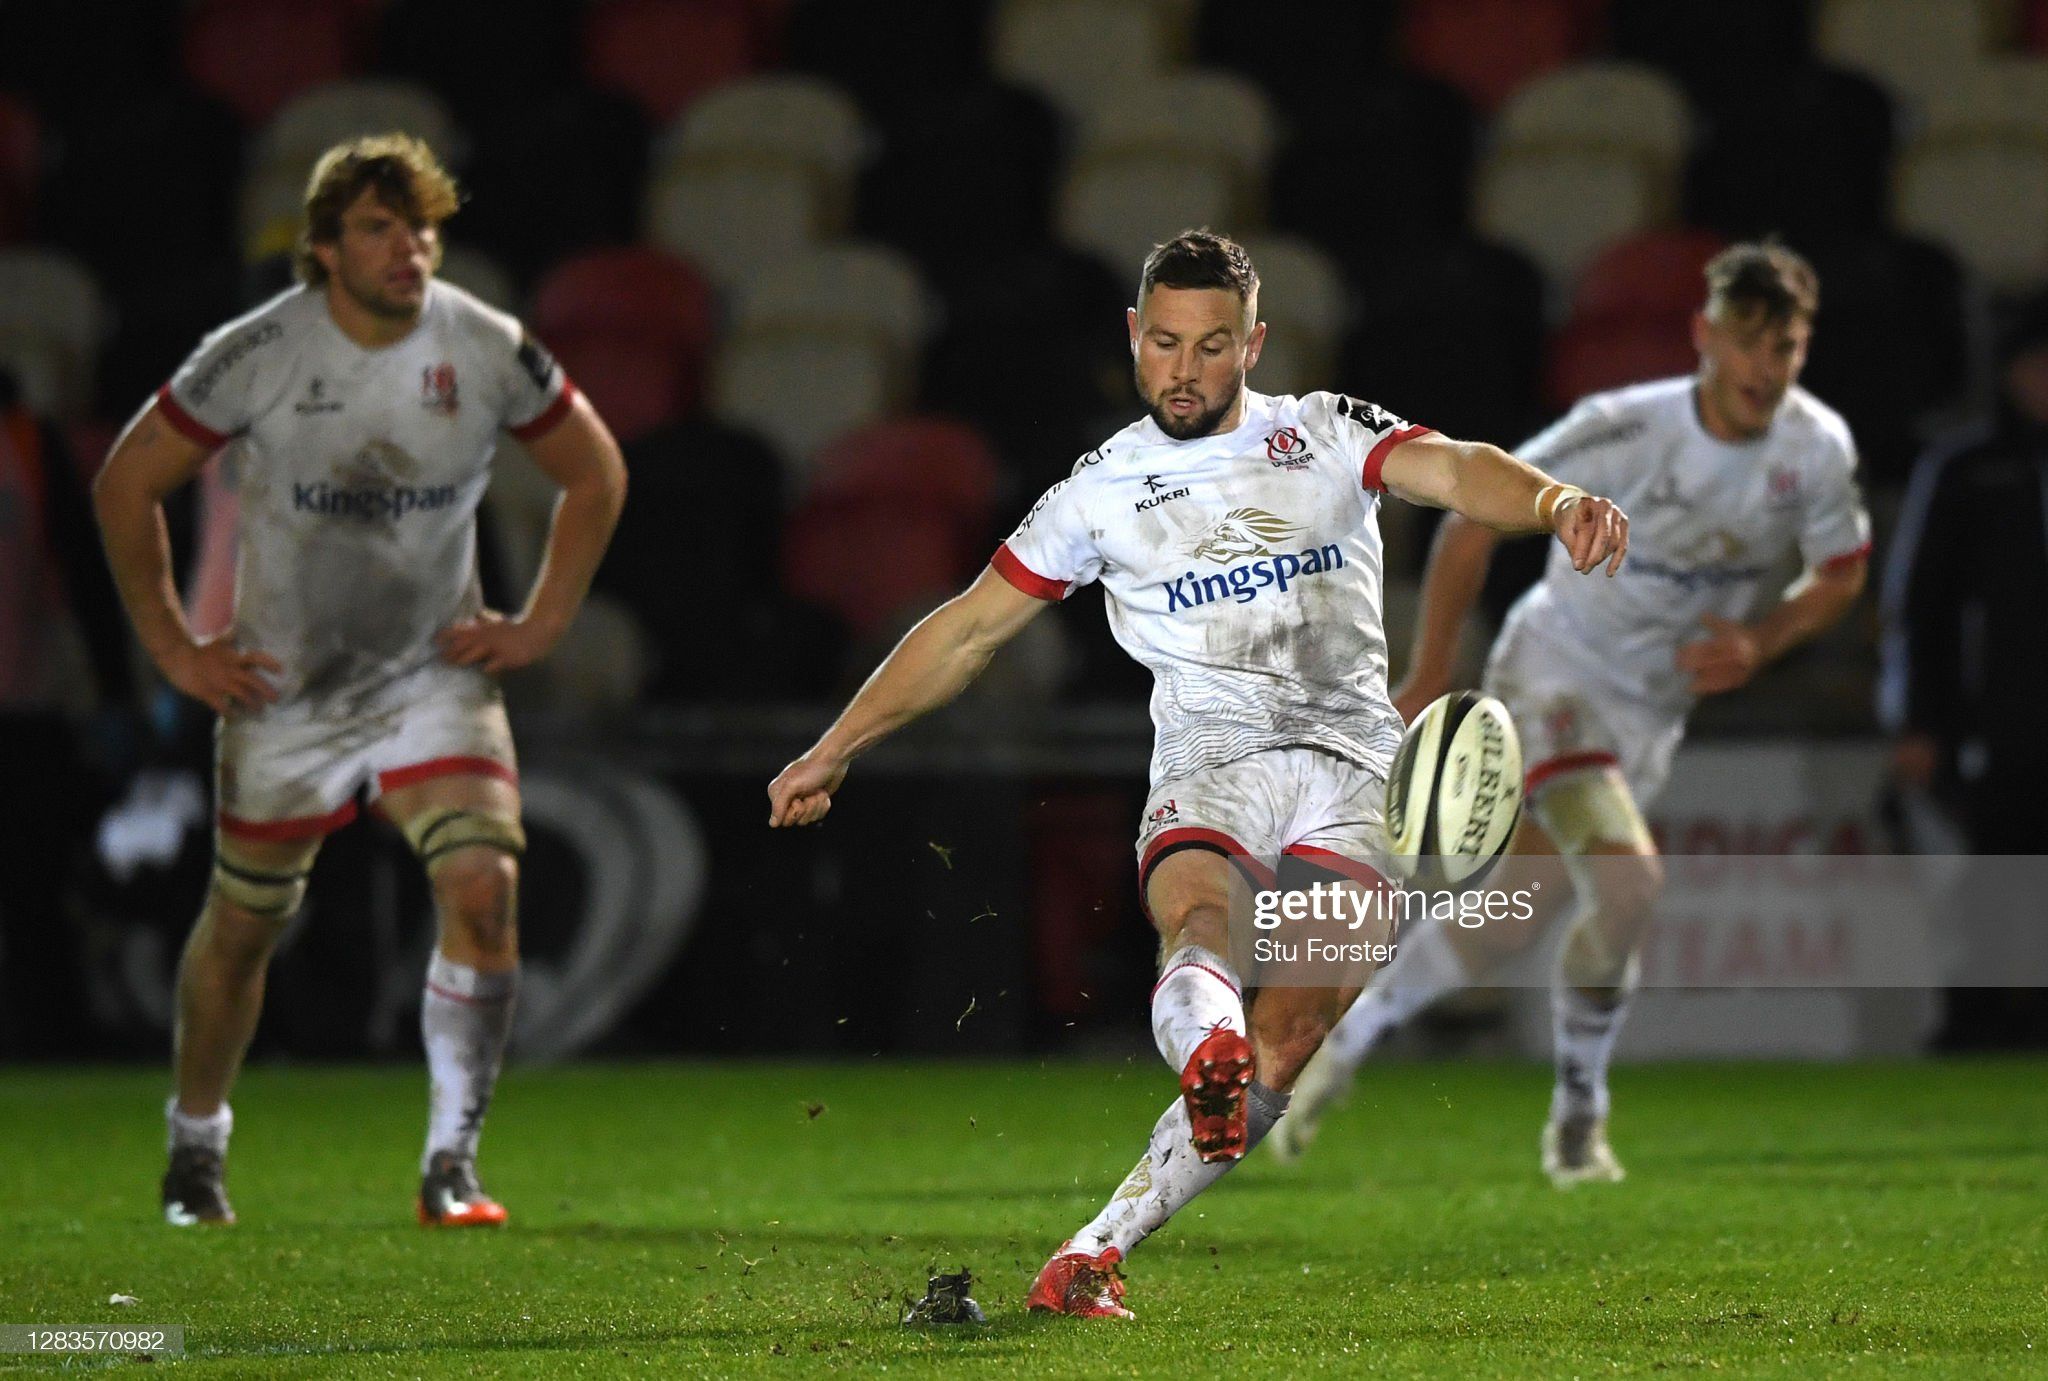 Ulster vs. Cardiff Rugby Prediction, Betting Tips & Odds │4 MARCH, 2022